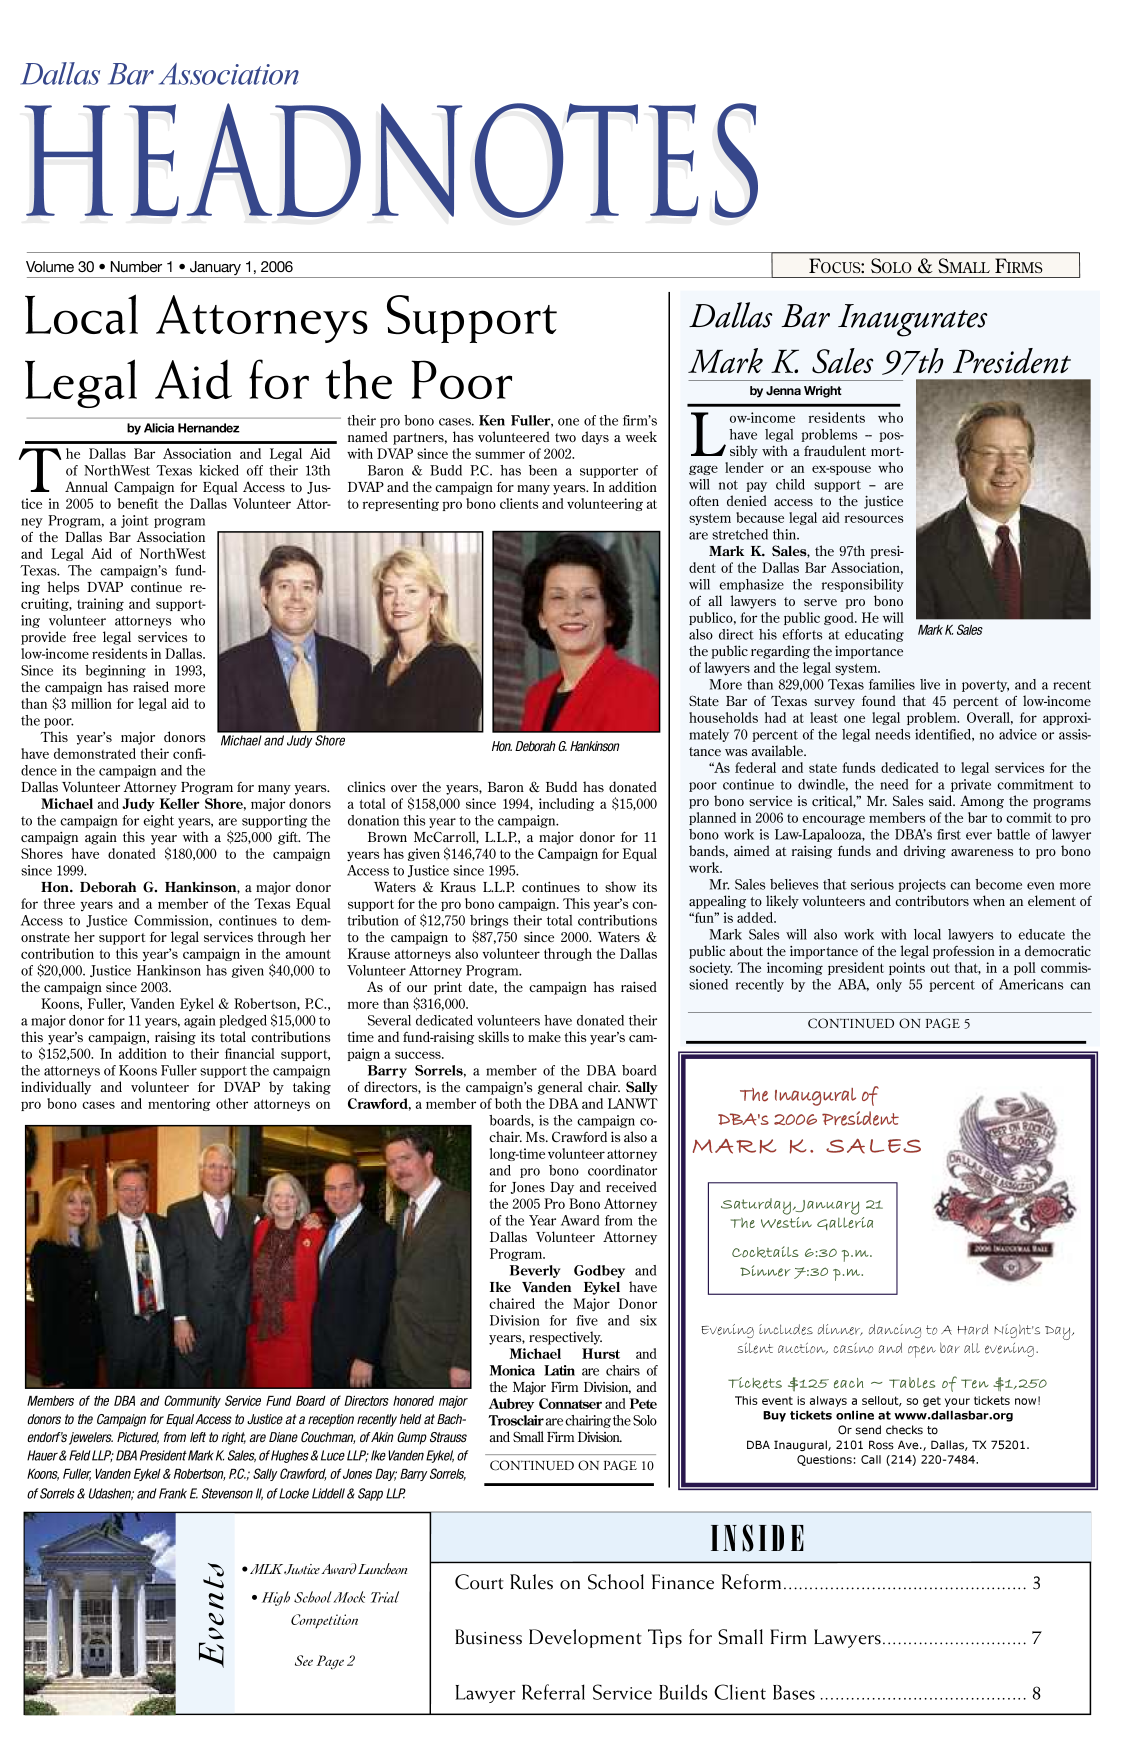 handle is hein.barjournals/hdba0030 and id is 1 raw text is: 



Dallas Bar Association


Volume 30 9 Number 1 9 January 1, 2006                                                                              Focus: SOLO & SJMAL FIRMS


Local Attorneys Support



Legal Aid for the Poor


                by Alicia Hernandez

he Dallas Bar Association and Legal Aid
       of NorthWest Texas kicked off their 13th
       Annual Campaign for Equal Access to Jus-
tice in 2005 to benefit the Dallas Volunteer Attor-
ney Program, a joint program
of the Dallas Bar Association
and Legal Aid of NorthWest
Texas. The campaign's fund-
ing helps DVAP continue re-
cruiting, training and support-
ing volunteer attorneys who
provide free legal services to
low-income residents in Dallas.
Since its beginning in 1993,
the campaign has raised more
than $3 million for legal aid to
the poor.
   This year's major donors Michael and Judy Shot
have demonstrated their confi-
dence in the campaign and the
Dallas Volunteer Attorney Program for many years.
   Michael and Judy Keller Shore, major donors
to the campaign for eight years, are supporting the
campaign again this year with a $25,000 gift. The
Shores have donated $180,000 to the campaign
since 1999.
   Hon. Deborah G. Hankinson, a major donor
for three years and a member of the Texas Equal
Access to Justice Commission, continues to dem-
onstrate her support for legal services through her
contribution to this year's campaign in the amount
of $20,000. Justice Hankinson has given $40,000 to
the campaign since 2003.
   Koons, Fuller, Vanden Eykel & Robertson, PC.,
a major donor for 11 years, again pledged $15,000 to
this year's campaign, raising its total contributions
to $152,500. In addition to their financial support,
the attorneys of Koons Fuller support the campaign
individually and volunteer for DVAP by taking
pro bono cases and mentoring other attorneys on


Members of the DBA and Community Service Fund Board of
donors to the Campaign for Equal Access to Justice at a receptic
endorf's jewelers. Pictured, from left to right, are Diane Couchma
Hauer & Feld LLP; DBA President Mark K Sales, of Hughes & Luce
Koons, Fuller, Vanden Eykel & Robertson, PC.; Sally Crawford, of.
of Sorrels & Udashen; and Frank E Stevenson II, of Locke Liddell


their pro bono cases. Ken Fuller, one of the firm's
named partners, has volunteered two days a week
with DVAP since the summer of 2002.
   Baron & Budd P.C. has been a supporter of
DVAP and the campaign for many years. In addition
to representing pro bono clients and volunteering at


Hon. Deborah G. Hankinson


clinics over the years, Baron & Budd has donated
a total of $158,000 since 1994, including a $15,000
donation this year to the campaign.
   Brown McCarroll, L.L.P., a major donor for 11
years has given $146,740 to the Campaign for Equal
Access to Justice since 1995.
    Waters & Kraus L.L.R continues to show its
 support for the pro bono campaign. This year's con-
 tribution of $12,750 brings their total contributions
 to the campaign to $87,750 since 2000. Waters &
 Krause attorneys also volunteer through the Dallas
 Volunteer Attorney Program.
   As of our print date, the campaign has raised
more than $316,000.
   Several dedicated volunteers have donated their
time and fund-raising skills to make this year's cam-
paign a success.
   Barry Sorrels, a member of the DBA board
 of directors, is the campaign's general chair. Sally
 Crawford, a member of both the DBA and LANWT
                     boards, is the campaign co-
                     chair. Ms. Crawford is also a
                     long-time volunteer attorney
                     and pro bono coordinator
                     for Jones Day and received
                     the 2005 Pro Bono Attorney
                     of the Year Award from the
                     Dallas Volunteer Attorney
                     Program.
                        Beverly Godbey and
                      Ike Vanden Eykel have
                      chaired the Major Donor
                      Division for five and six
                      years, respectively.
                        Michael    Hurst   and
                      Monica Latin are chairs of
                      the Major Firm Division, and
Directors honored major Aubrey Connatser and Pete
on recently held at Bach-  Trosclair are chairing the Solo
an. of Akin Gump Strauss  and Small Firm Division.


LLP; Ike Vanden Eykel, of
Jones Day; Barry Sorrels,
I & Sapp LLP


CONTINUED ON PAGE 10


Dallas Bar Inaugurates


Mark K Sales 97th President
         by Jenna Wright
 ow-income        residents who
      have legal problems -- pos-
      sibly with a fraudulent mort-
gage lender or an ex-spoUse who
will not pay child support - are
often denied access to the justice
system because legal aid resources
are stretched thinl.
   Mark K. Sales, the 97th presi-
dent of the Dallas Bar Association,
will emphasize the responsibility
of all lawyers to serve pro bono
publico, for the public good. He will
also direct his efforts at educating Mark K Ses
the public regarding the importance
of lawyers and the legal system.
   More than 829,000 Texas families live in poverty, and a recent
State Bar of Texas survey found that 45 percent of low-income
households had at least one leg-l problem. Overall, for approxi-
mately 70 percent of the legal needs identified, no advice or assis-
tance was available.
   As federal and state funds dedicated to legal services for the
poor continue to dwindle, the need for a private commitment to
pro bono service is critical, Mr. Sales said. Among the programs
planned in 2006 to encourage members of the bar to commit to pro
bono work is Law-lapalooza, the DBA's first ever battle of lawyer
bands, aimed at raising funds and driving awareness to pro bono
work.
   Mr. Sales believes that serious projects can become even more
appealing to likely volunteers and contributors when an element of
fun is added.
   Mark Sales will also work with local lawyers to educate the
public about the importance of the legal profession in a democratic
society. The incoming president points out that, in a poll commis-
sioned recently by the ABA, only 55 percent of Americans can

                  NINUEDF       ON PAGE5



        The Inagral of'

     DA's 2004 PresLtdet

 MARK K. SALES

           satudayJanary21


       The e Westivn Calleria
       cocail-s 6:30 p.ml.
       Dinnvuver 7:30 p.mv.



  Eve iuvuvucL  uves dnuvner, dacnug to A a NI ght's DayU,
        siLevntutvon, cai  and RvGUopen ar aLL evuvg.

      Tickets $125 each -TabLes of Teon ,L250
      This event is always a sellout, so get your tickets now!
           Buy tickets online at www.dallasbar.org
                       Or send checks to
         DBA Inaugural, 2101 Ross Ave., Dallas, TX 75201.
                Questions: Call (214) 220-7484.


* MKJutie AwardLuncheon

  Hiqb School Mock Trial
       Competition

       See Paqe 2


Court Rules  on  School Finance  Reform  ........................................... 3


Business Development Tips for Small Firm Lawyers.................. 7


ILawyer Referral Service Builds Client Bases.............................. 8


ES


